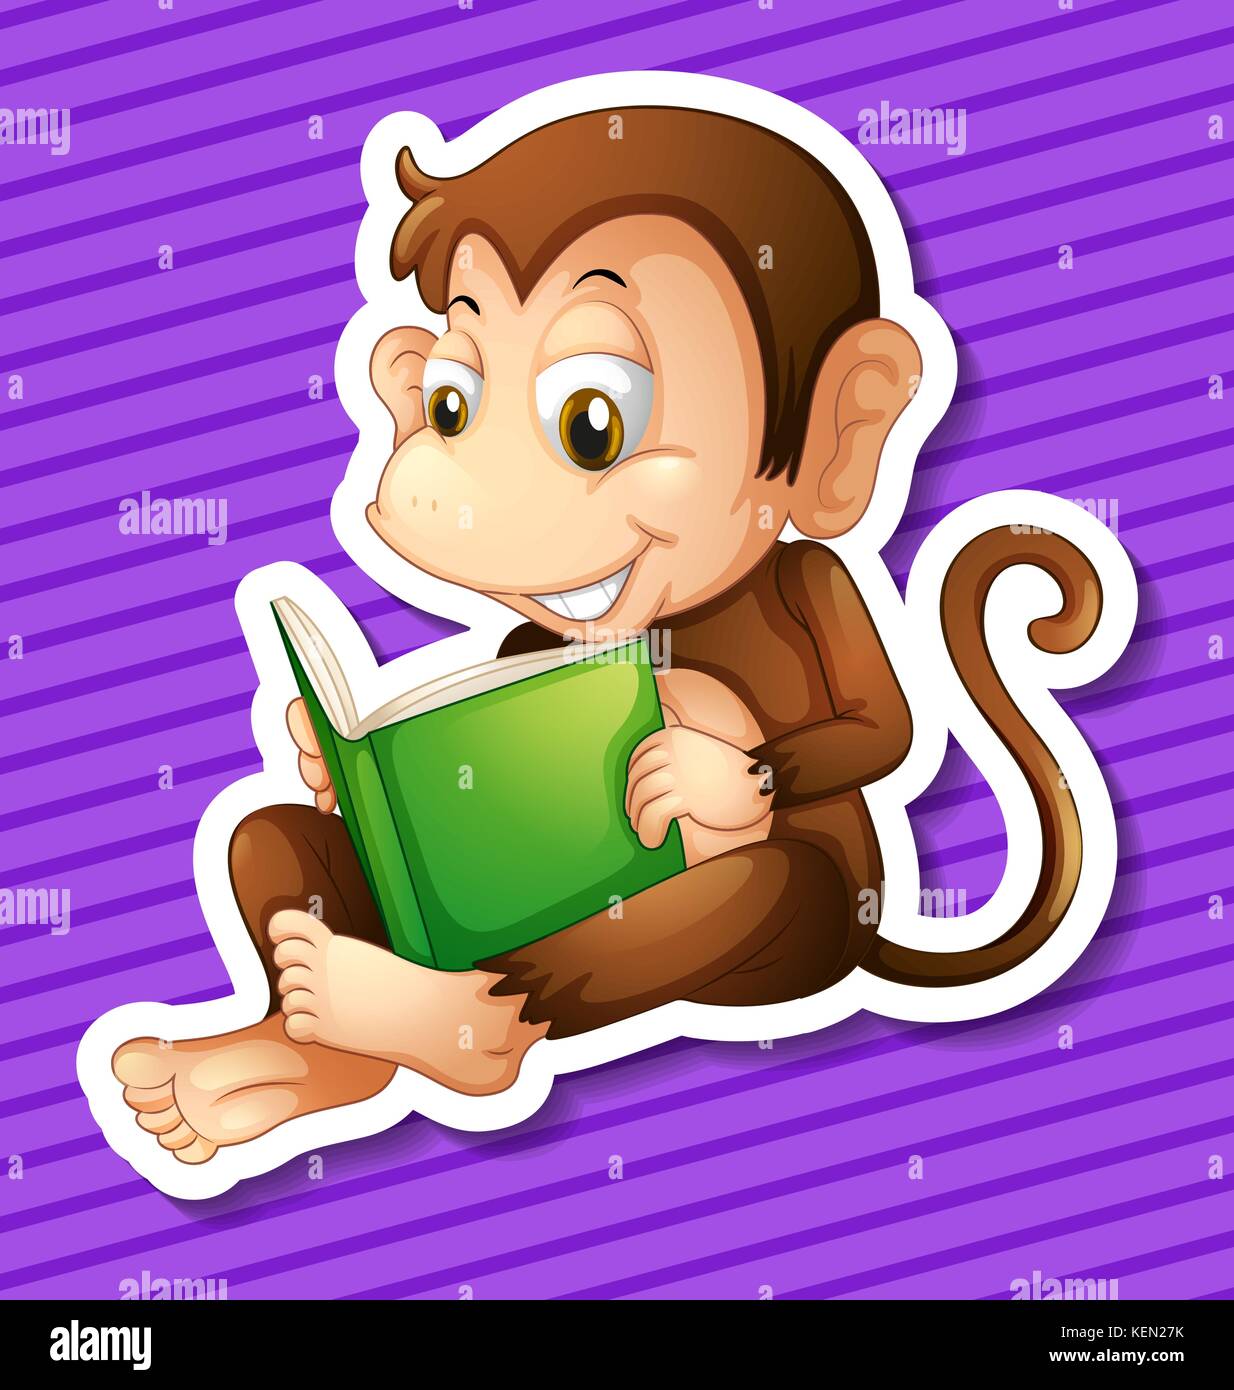 Illustration of a monkey reading book Stock Vector